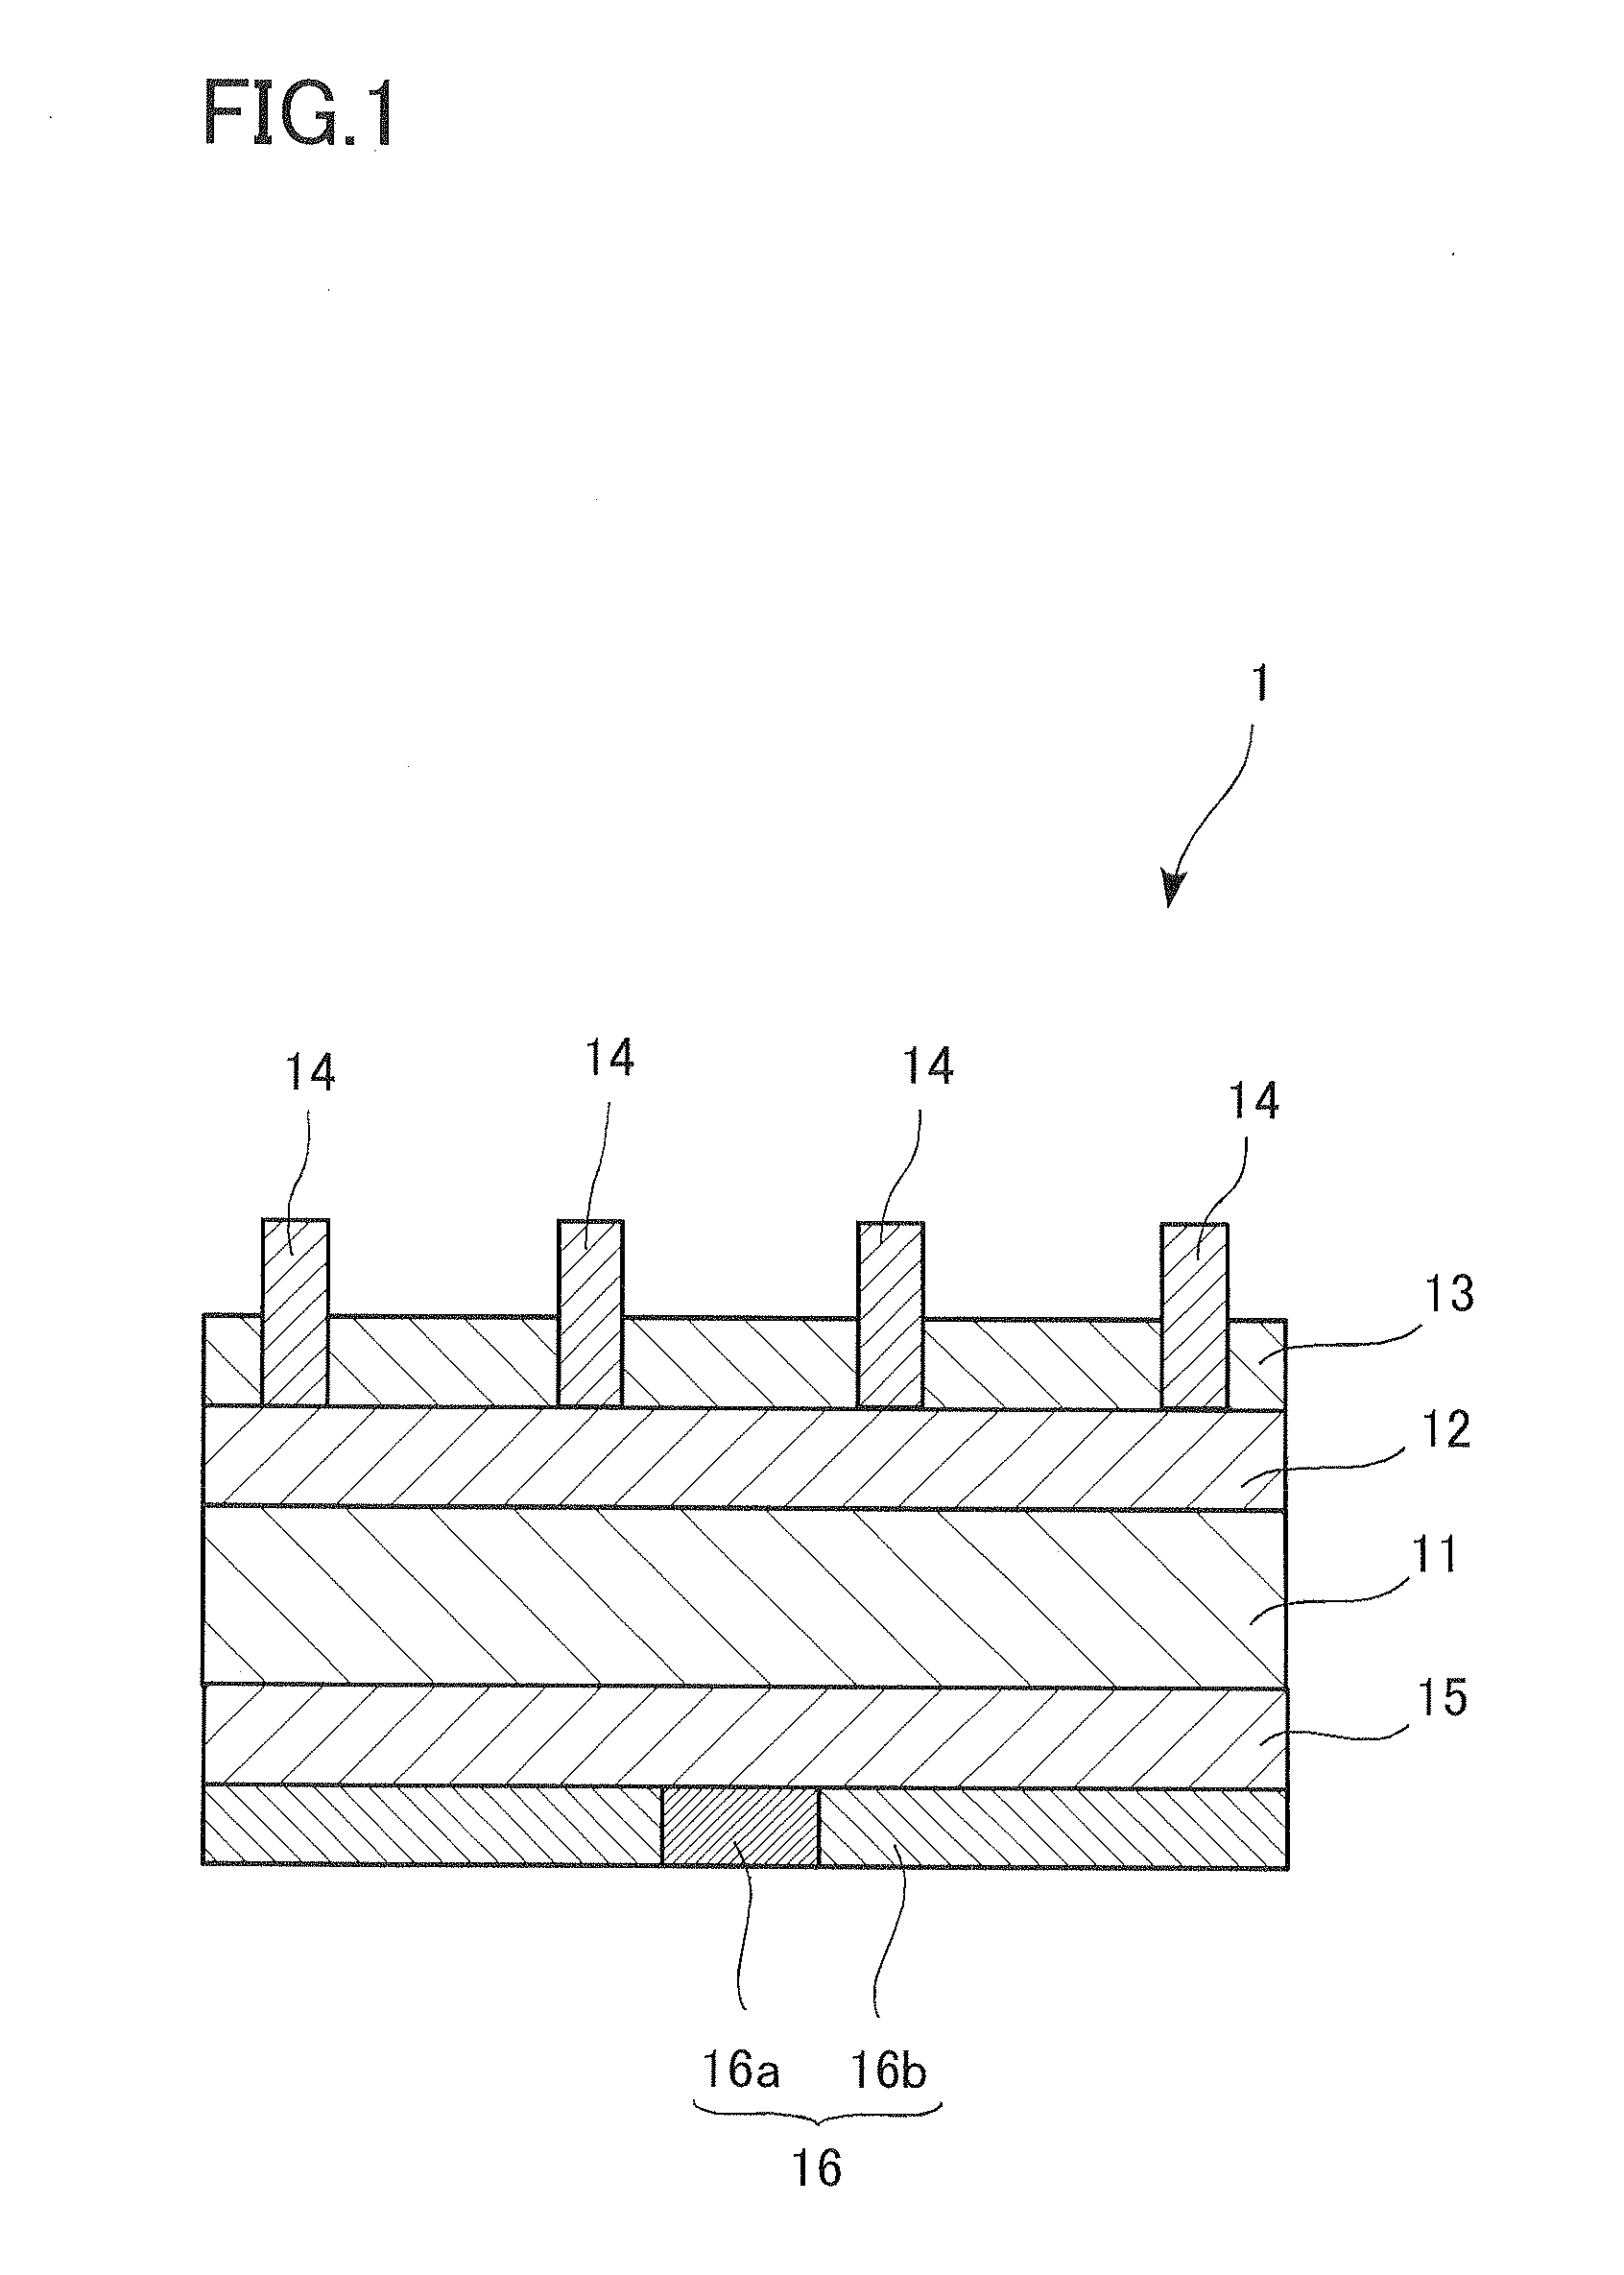 Film-forming method for forming passivation film and manufacturing method for solar cell element